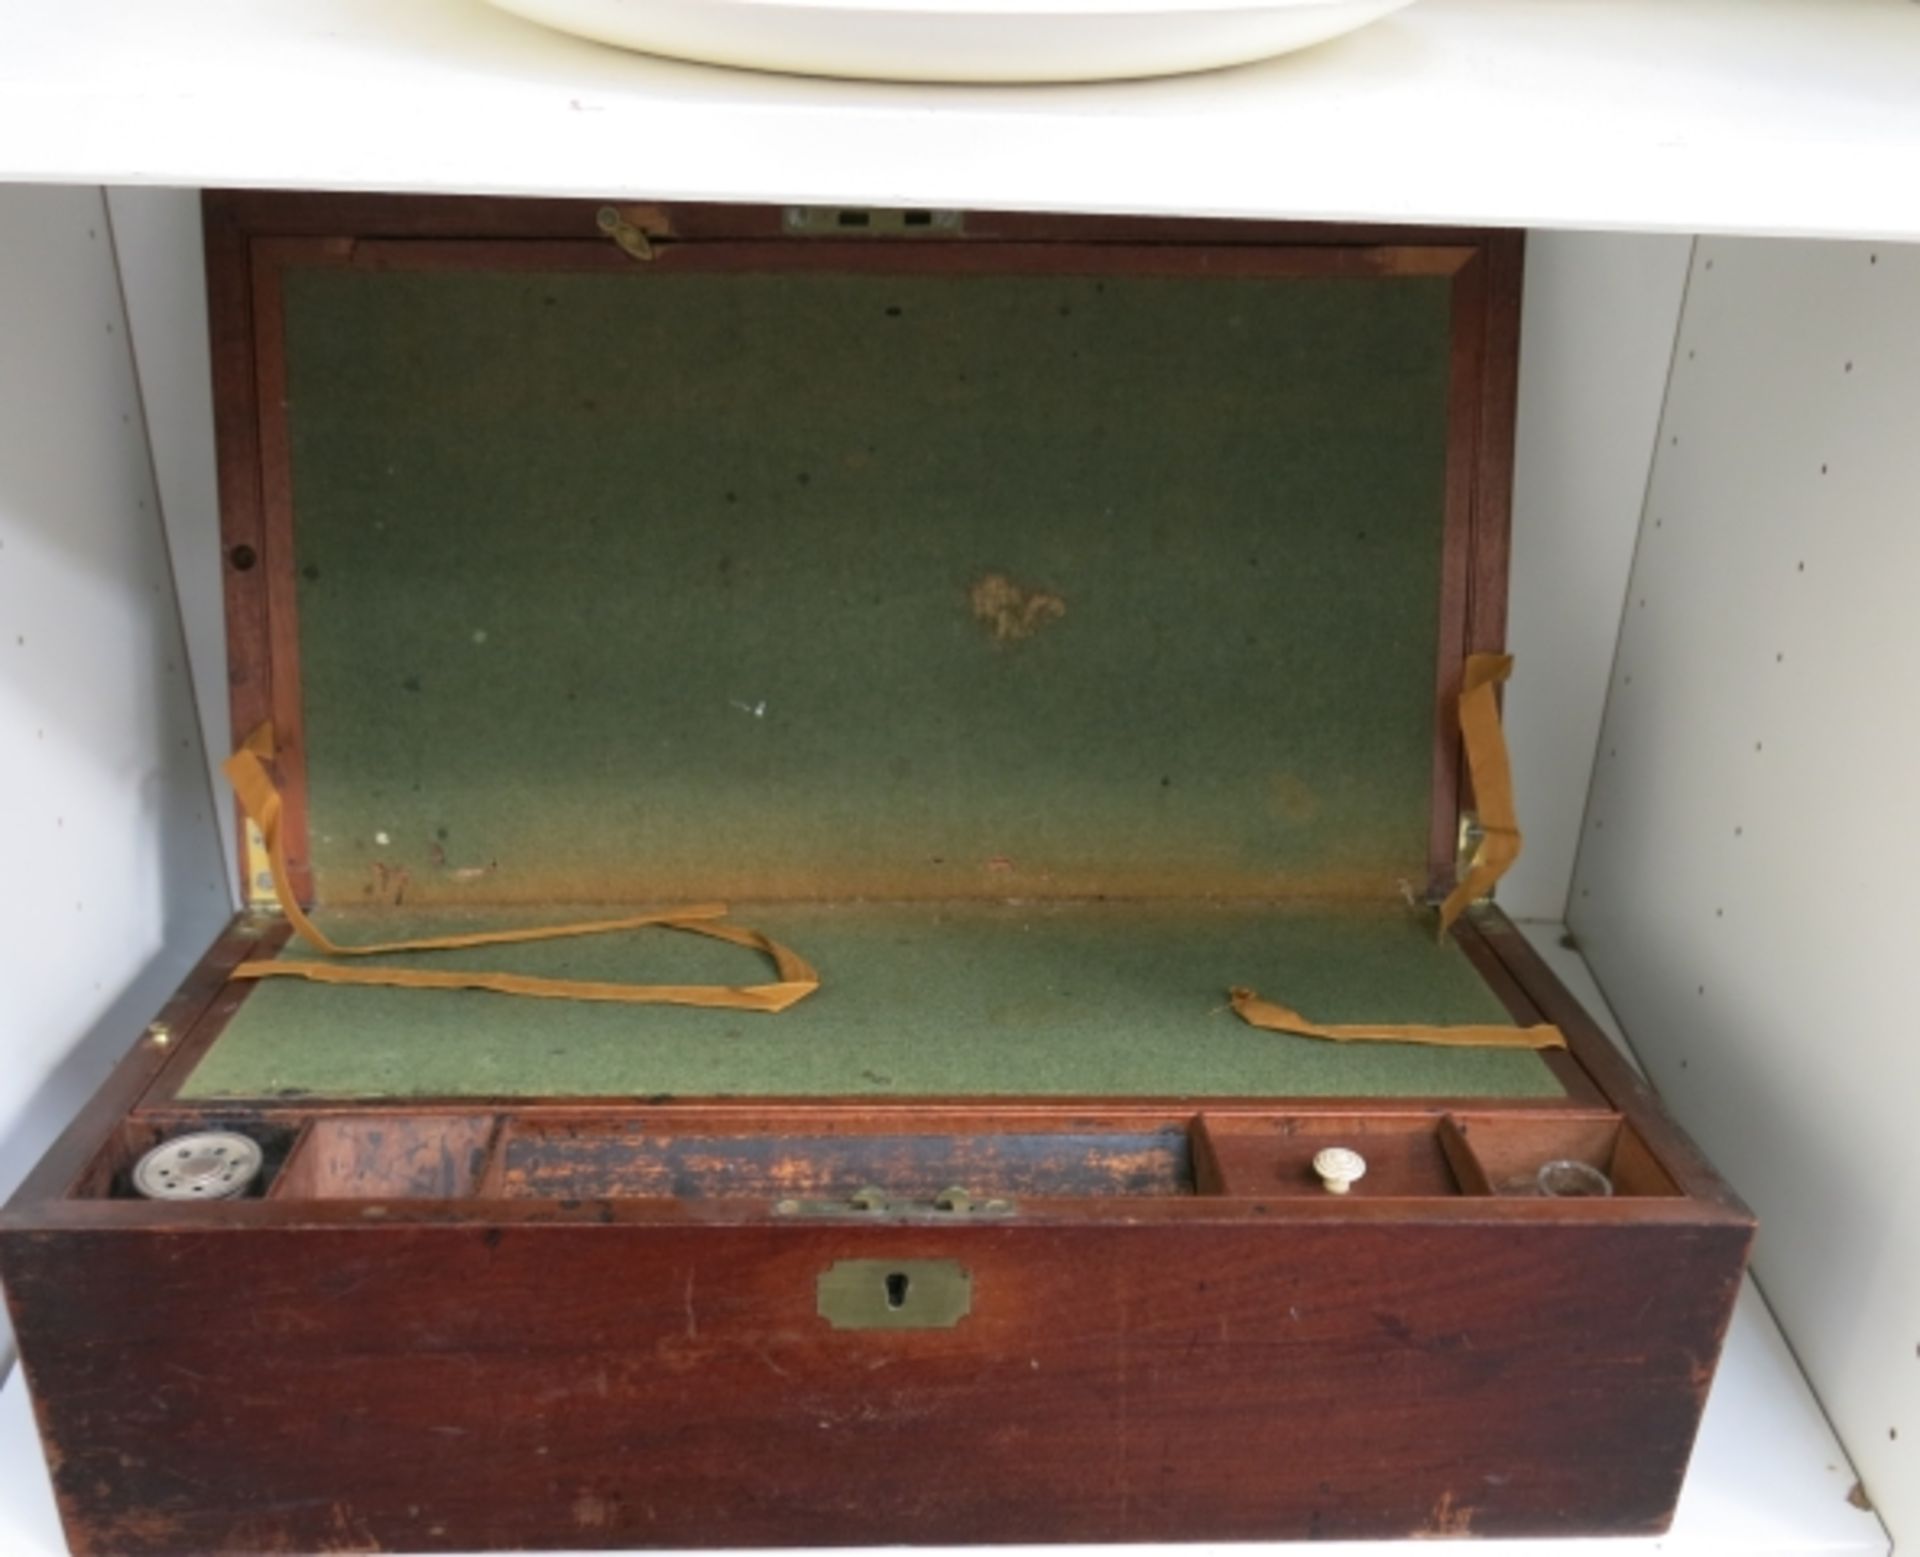 Mahogany writing box with fitted interior 45 x 24 x 15cm (est. £60-£80) - Image 2 of 2